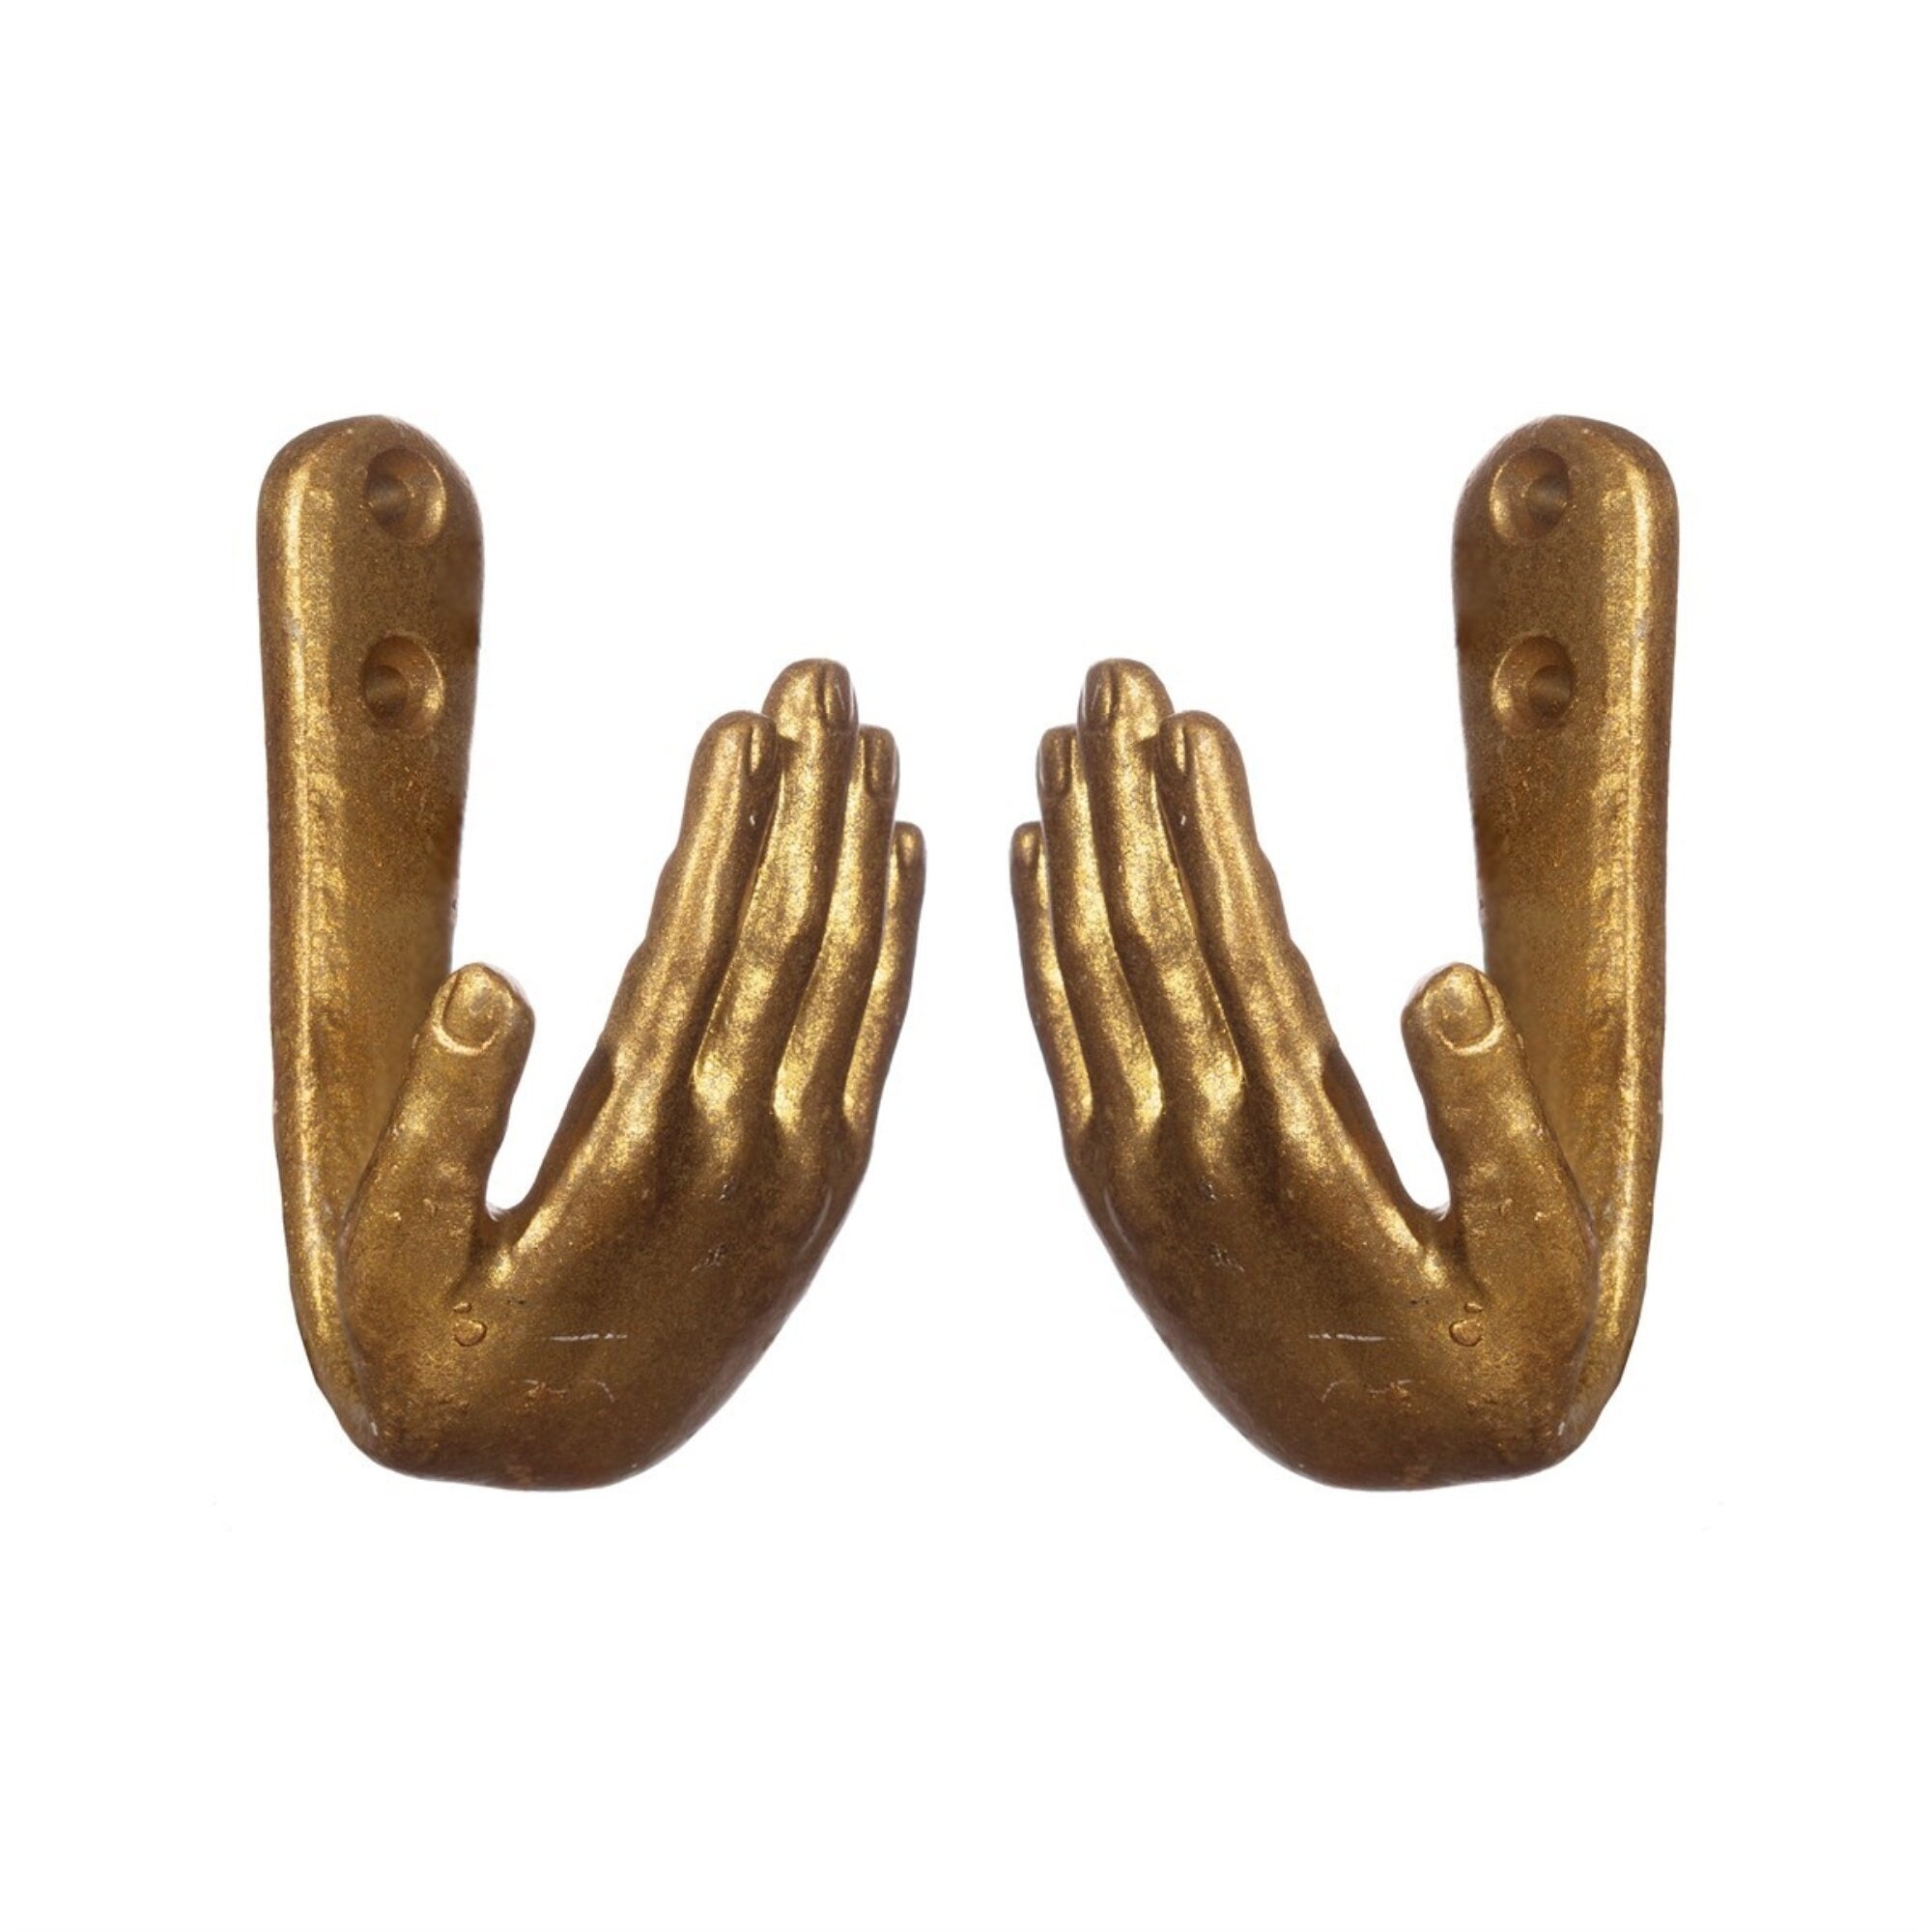 Pair of Vintage Golden Hands Curtain Tie Backs Wall Mounted - Etsy UK